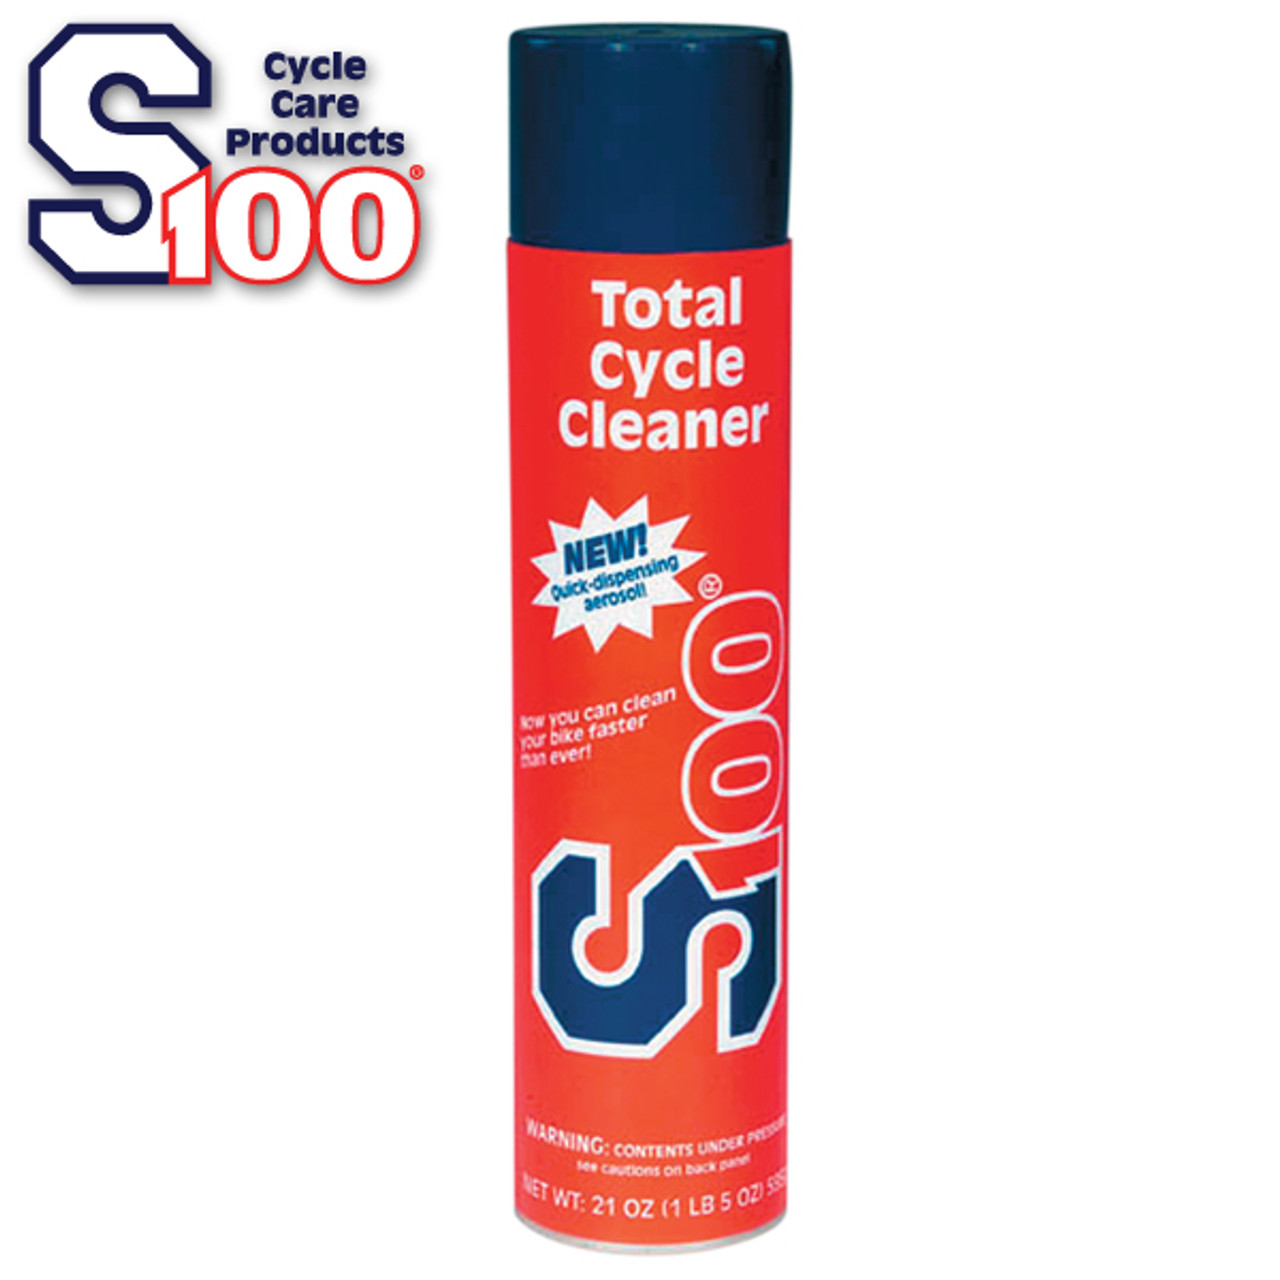 S100 Total Cycle Cleaner - S100 Cycle Care Products